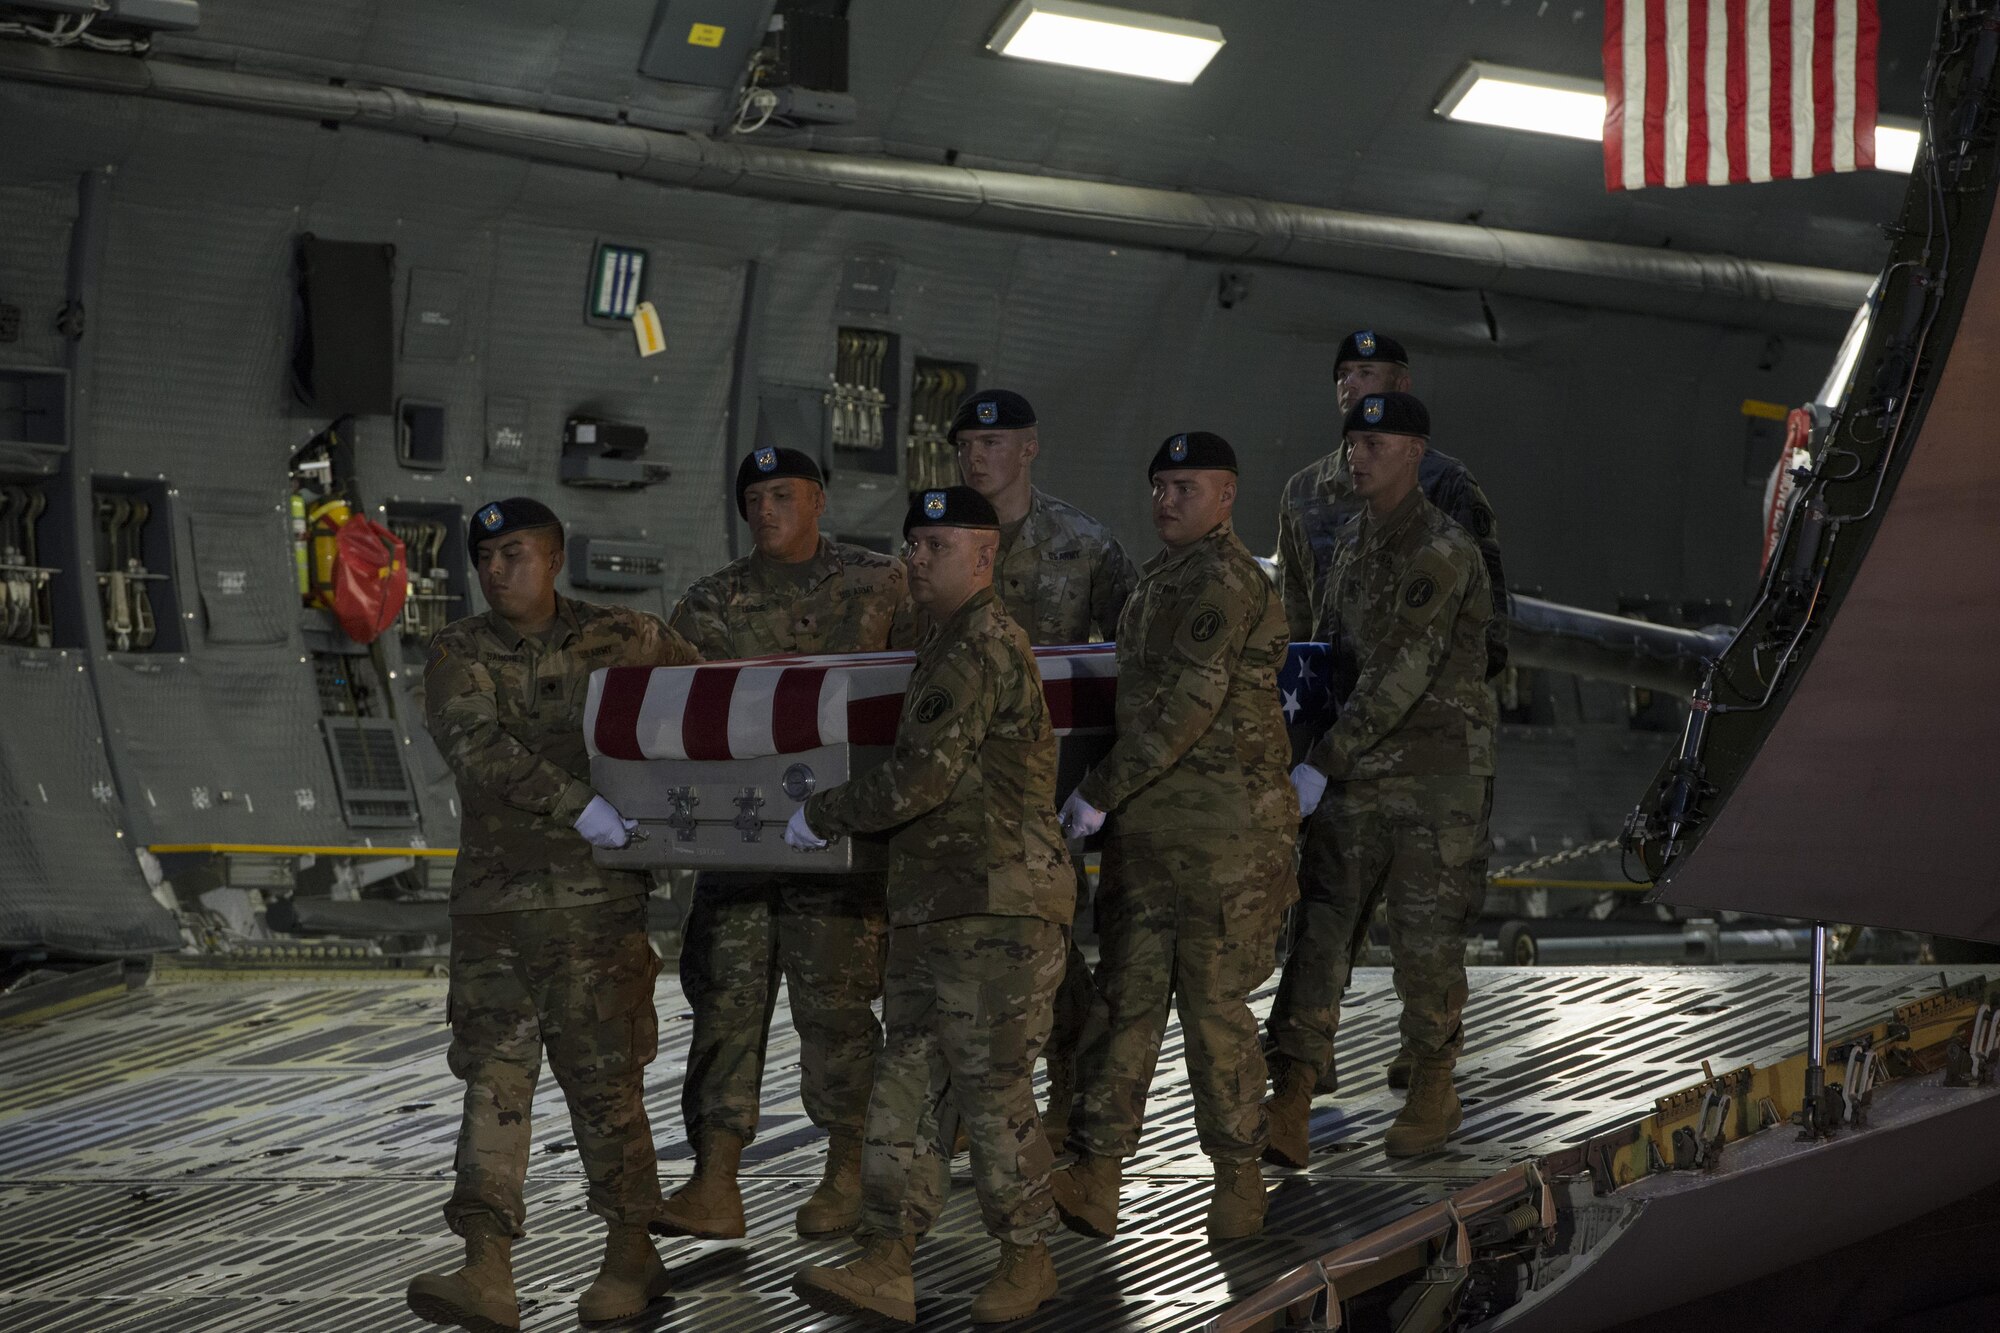 A U.S. Army carry team transfers the remains of Army Sgt. Dillon Baldridge of Youngsville, N.C., June 12, 2017, at Dover Air Force Base, Del. Baldridge was assigned to Headquarters and Headquarters Battery, 3rd Battalion, 320th Field Artillery Regiment, 101st Airborne Division and Company D, 1st Battalion, 187th Infantry Regiment, 3rd Brigade Combat Team, 101st Airborne Division, Fort Campbell, Ky. (U.S. Air Force photo by Senior Airman Aaron J. Jenne)